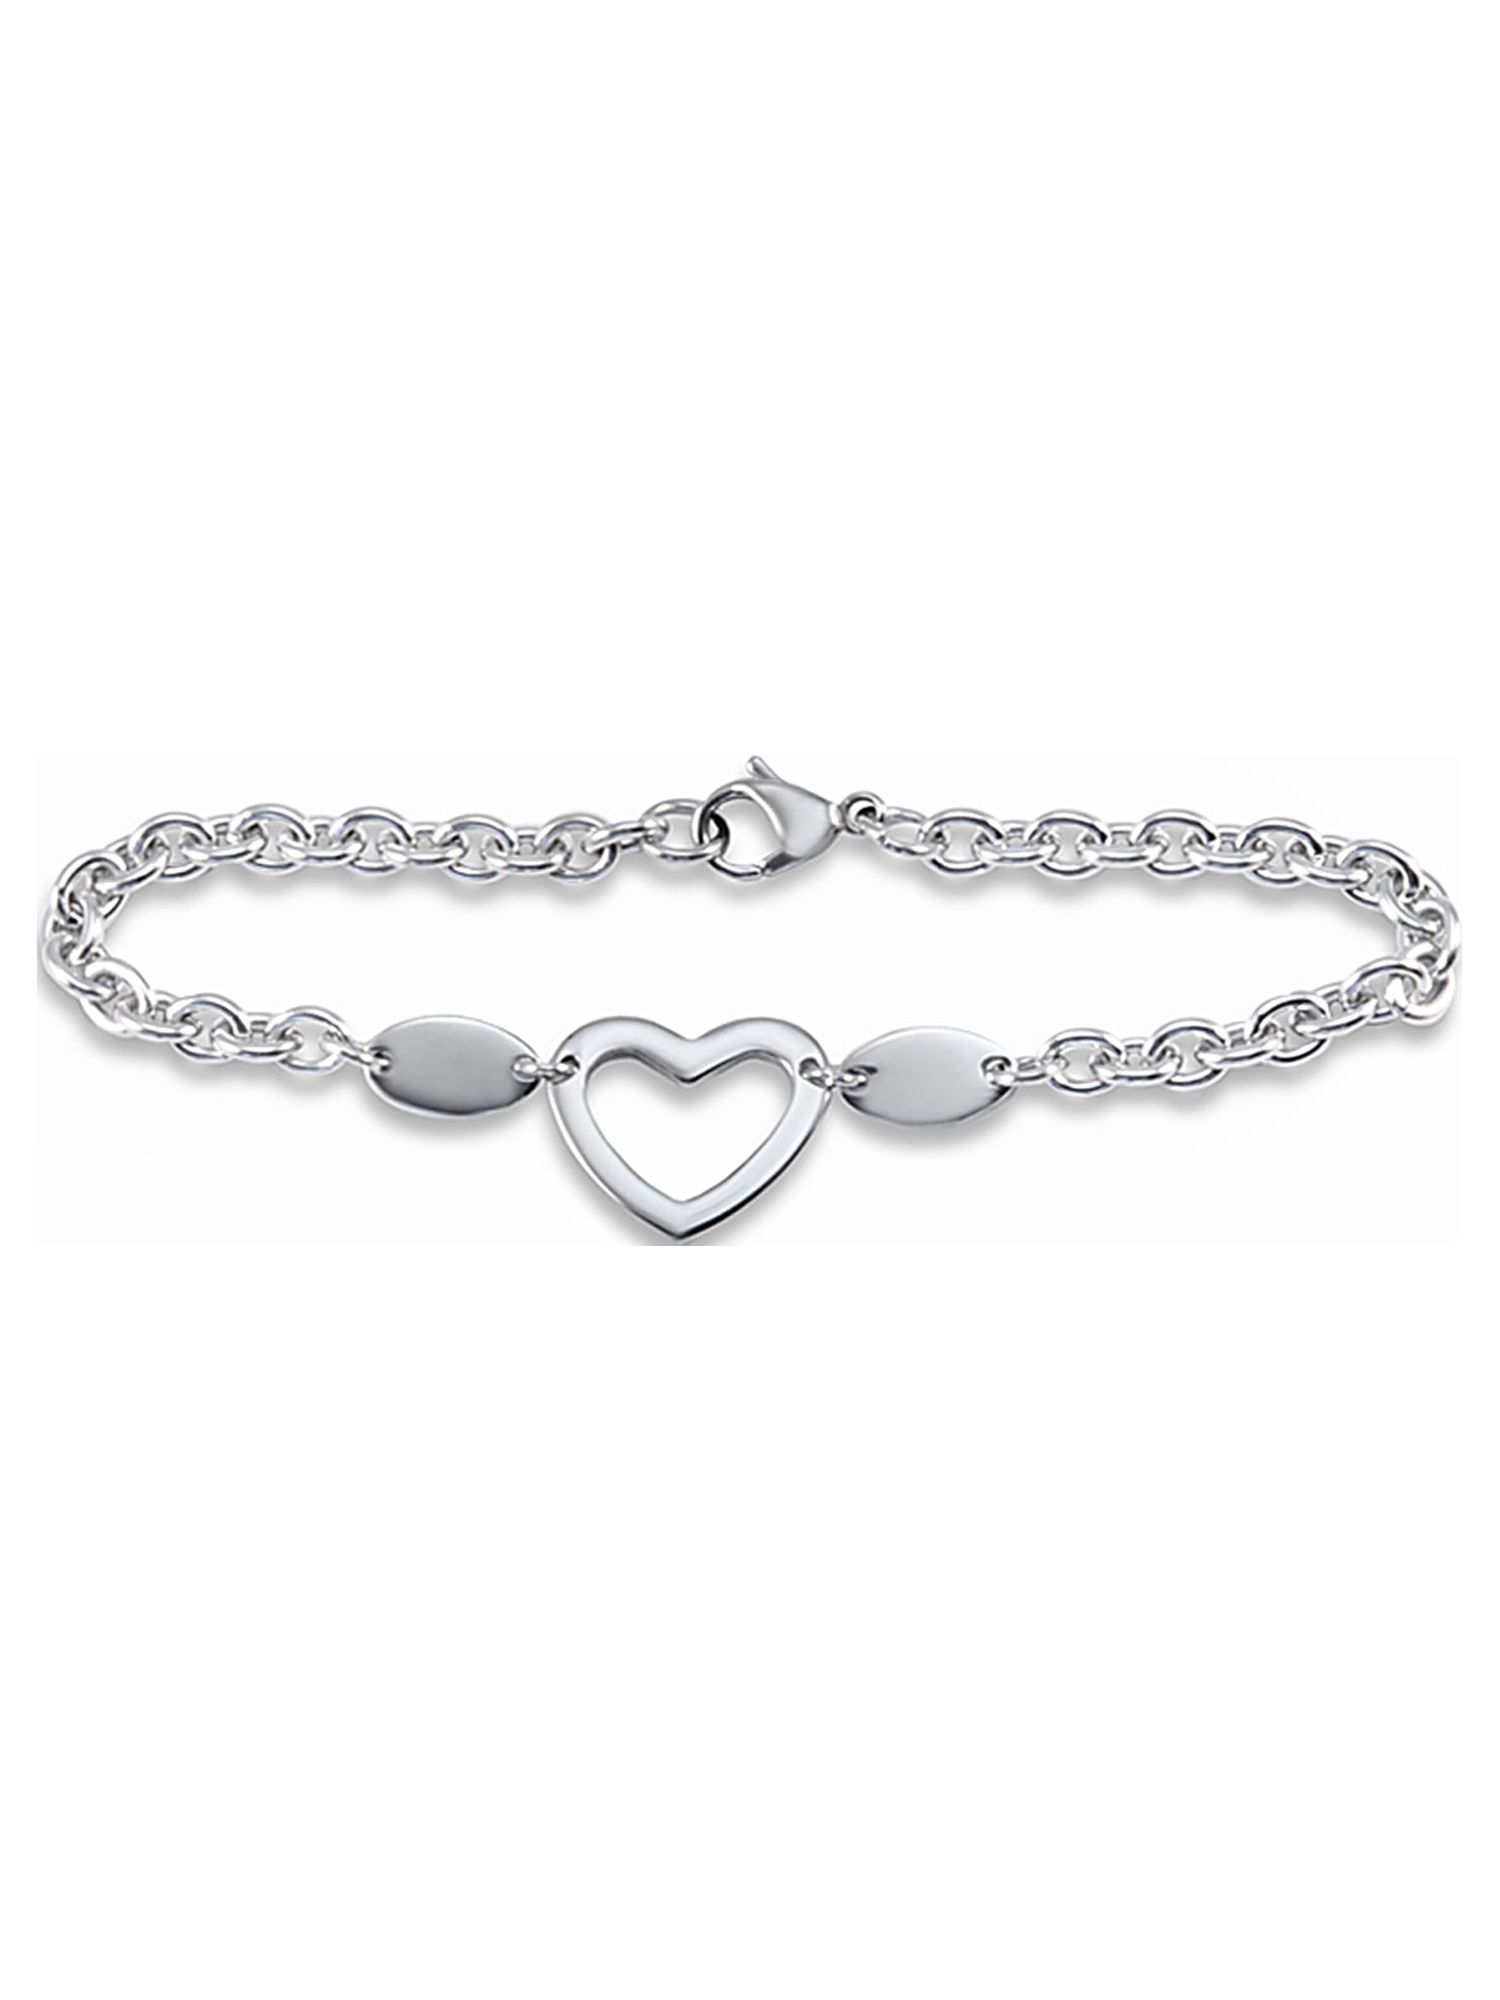 Stainless Steel Polished Heart Cut-out Charm Bracelet - image 3 of 4